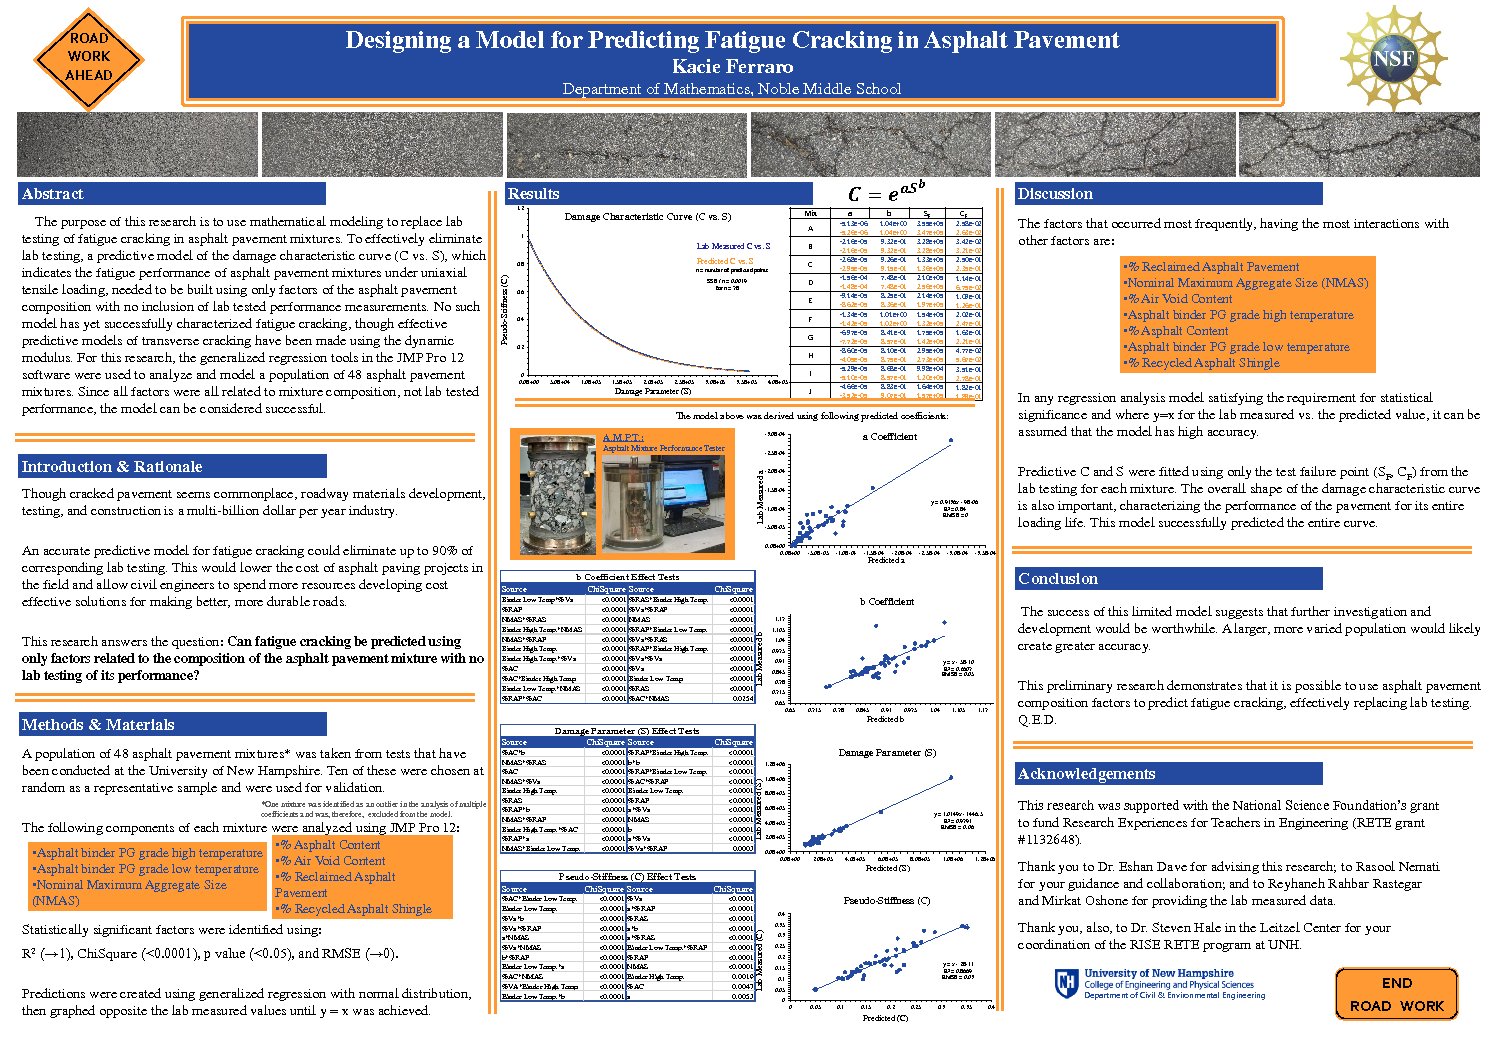 Designing A Model For Predicting Fatigue Cracking In Asphalt Pavement by knk5